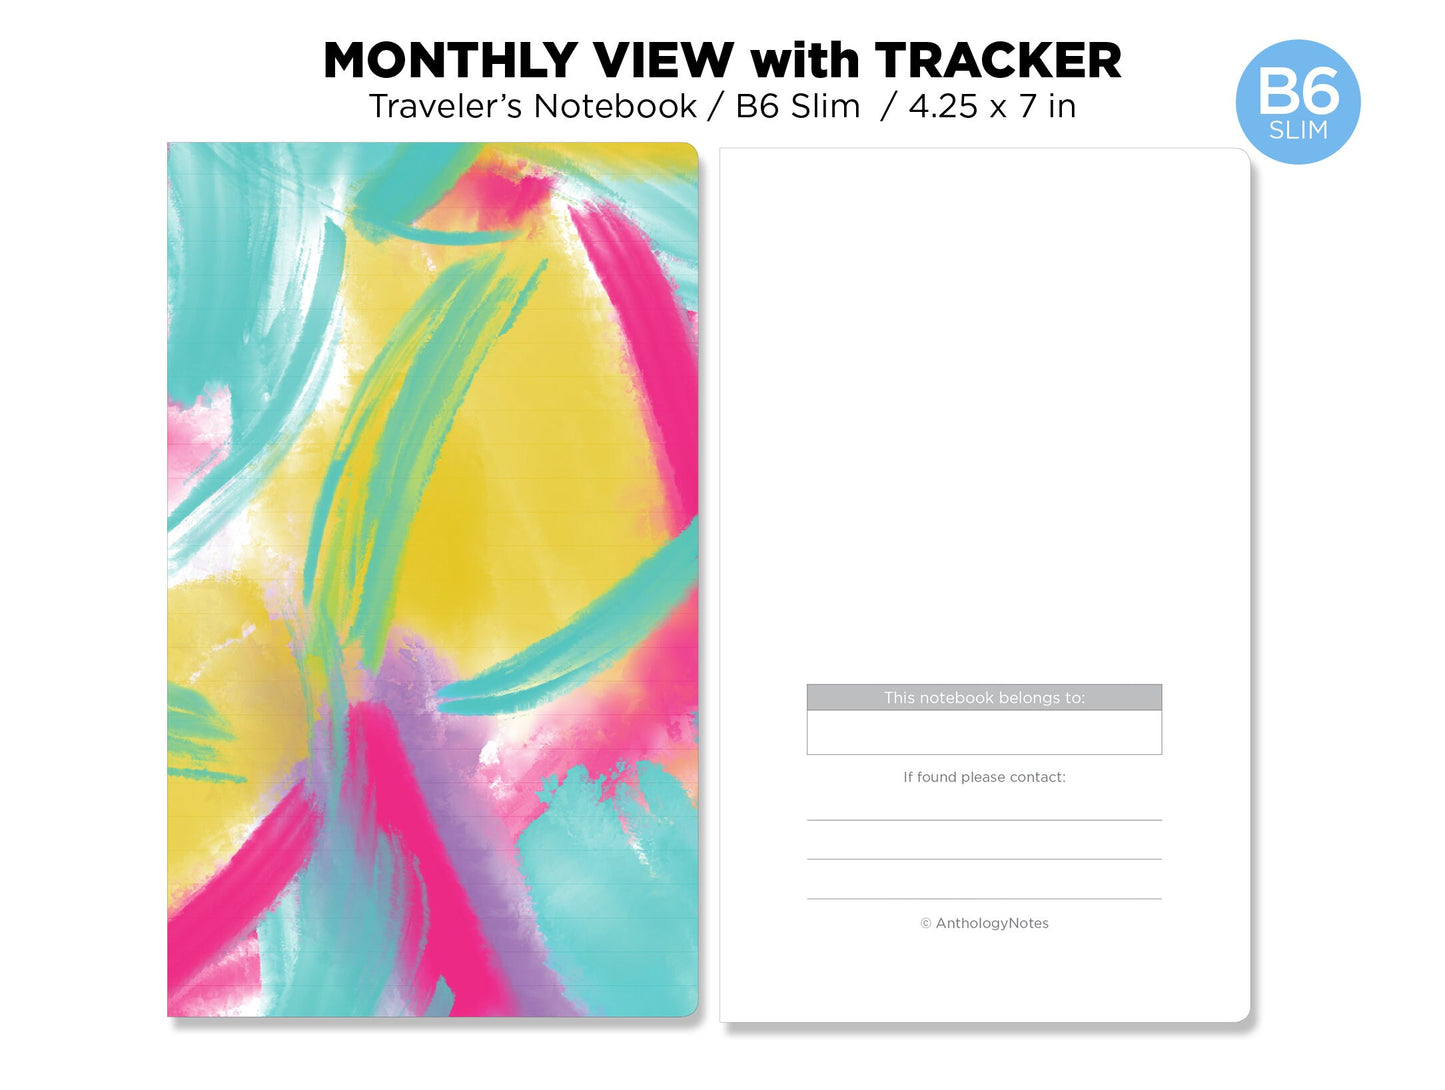 B6 SLIM Monthly View With Tracker GRID Traveler's Notebook Printable Insert